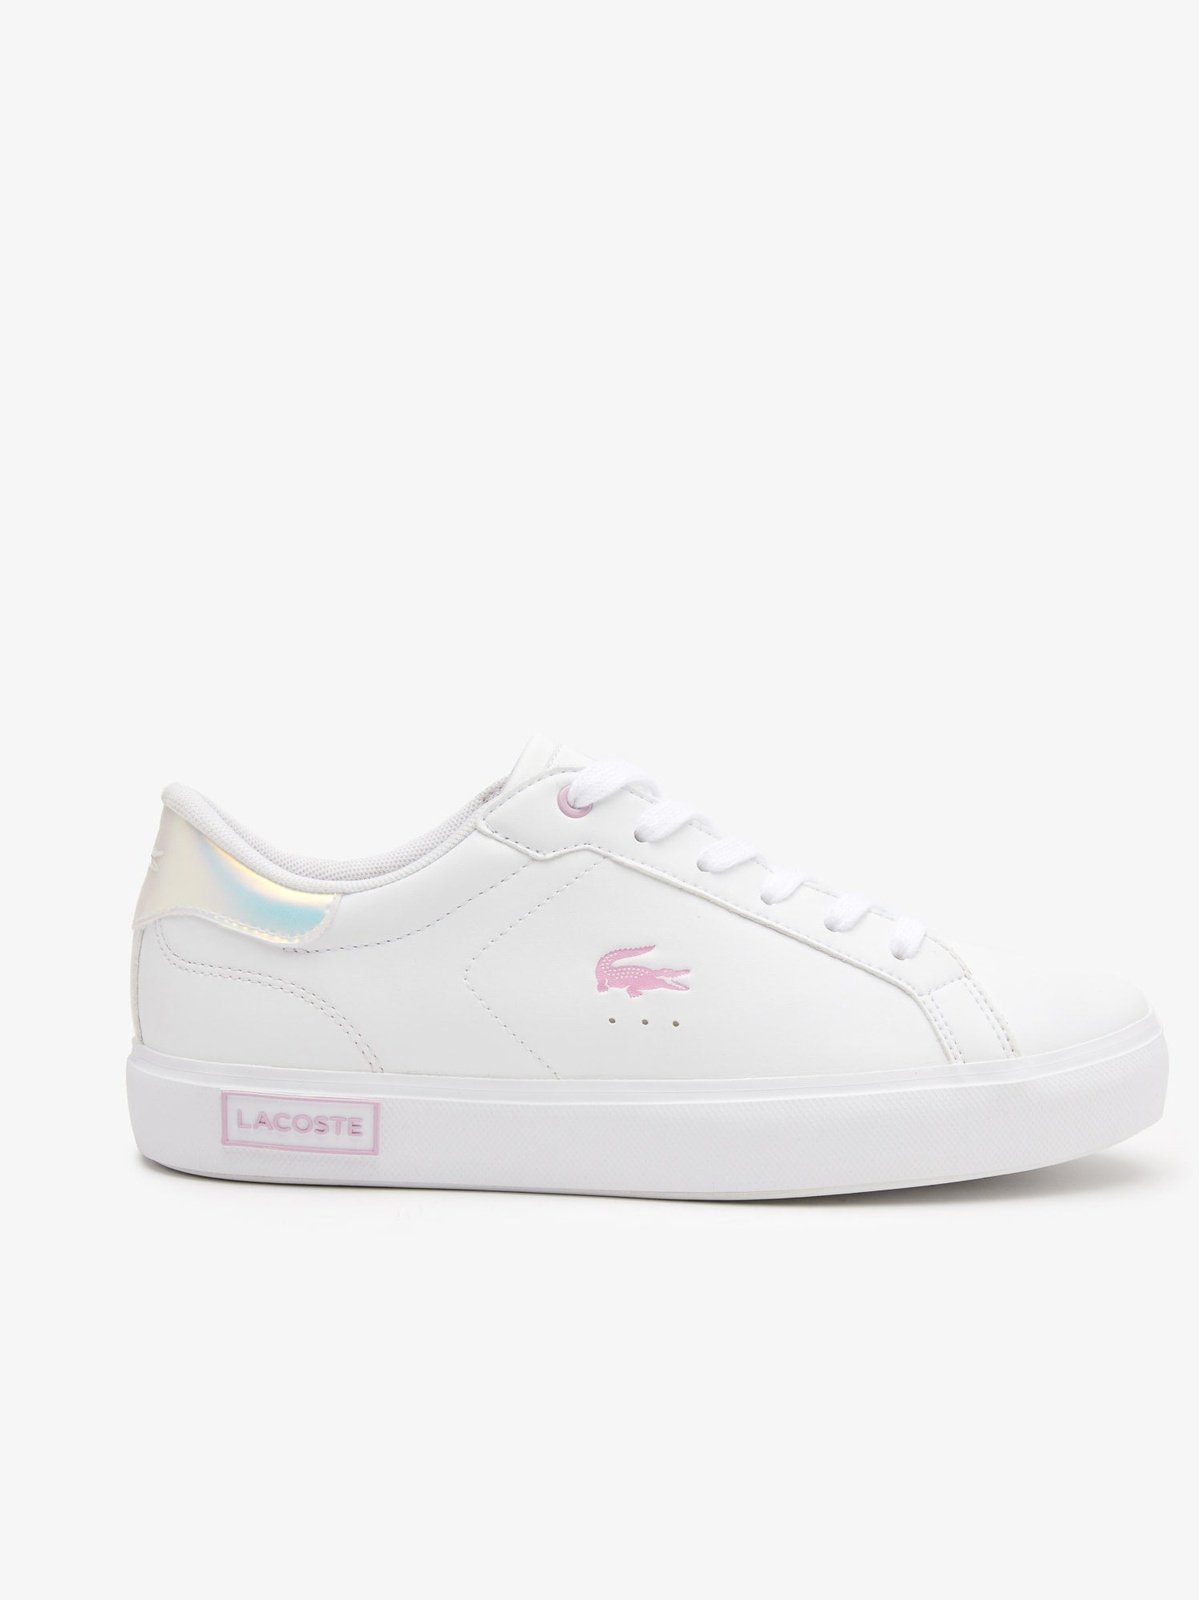 Lacoste Juniors Powercourt Synthetic Trainers White/White 44SUJ0018 21g 5